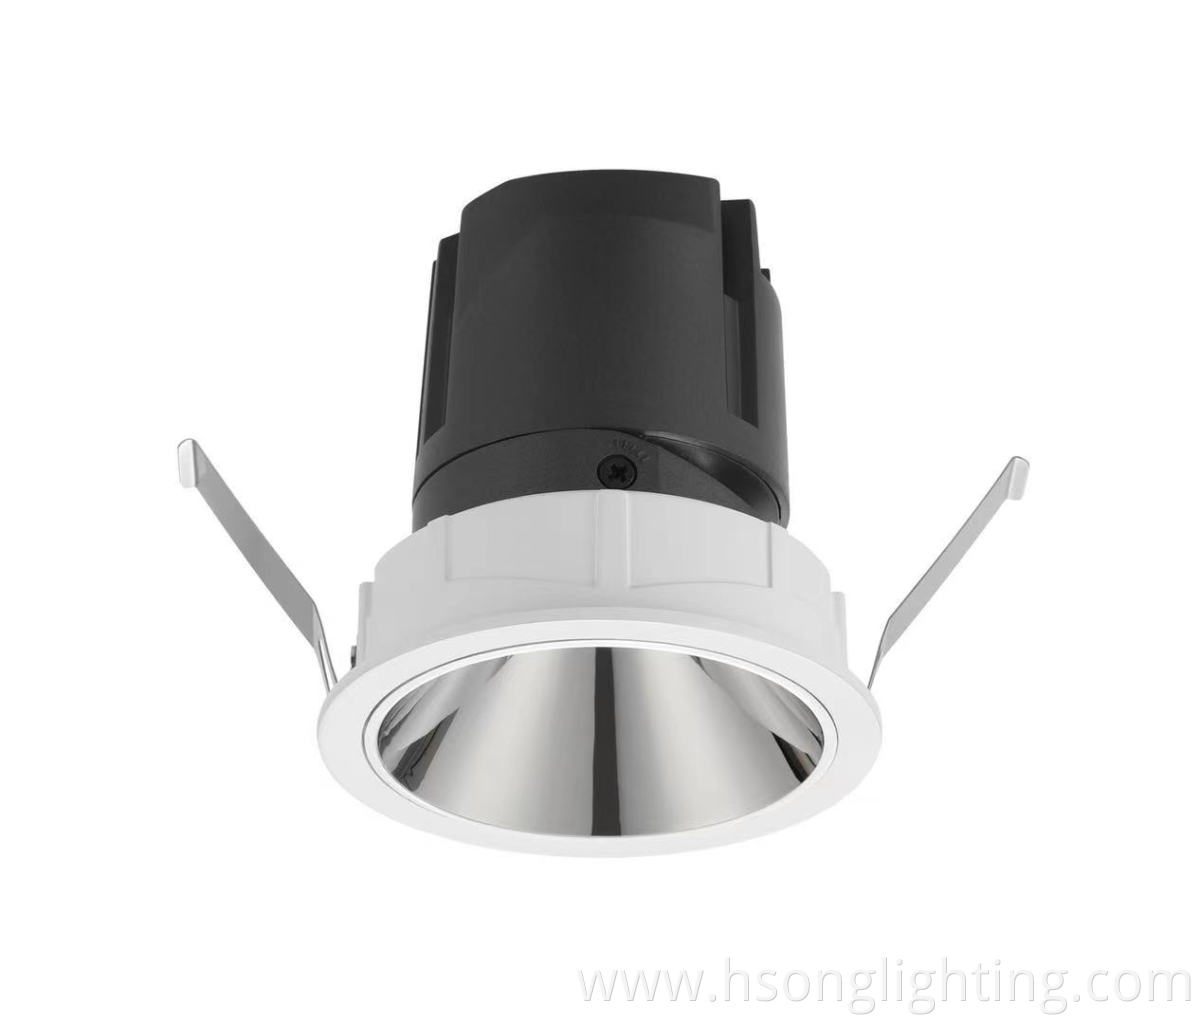 HSONG New Design Die Casting alumium 10W 20W Recessed Led Spotlight for Office Hotel